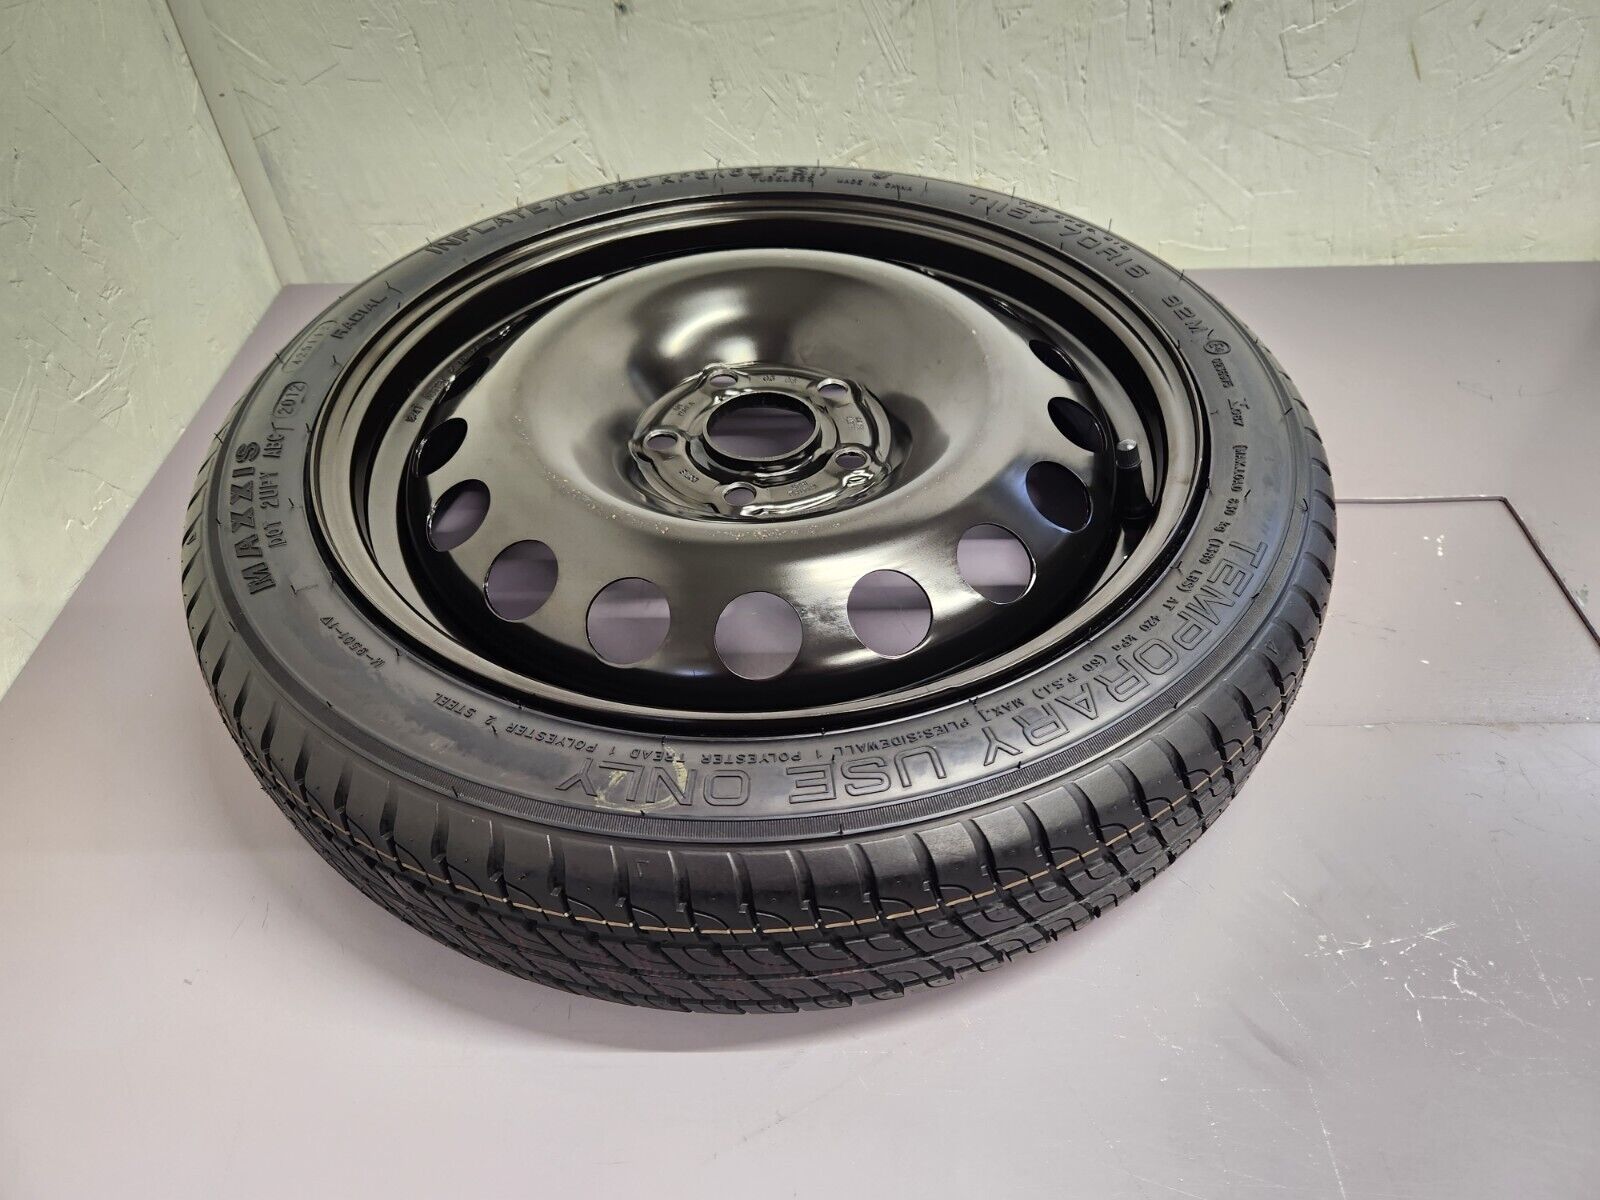 2012-2020 Chevrolet Sonic Spare Tire Compact Donut 5x105 OEM T115/70R16 #M459